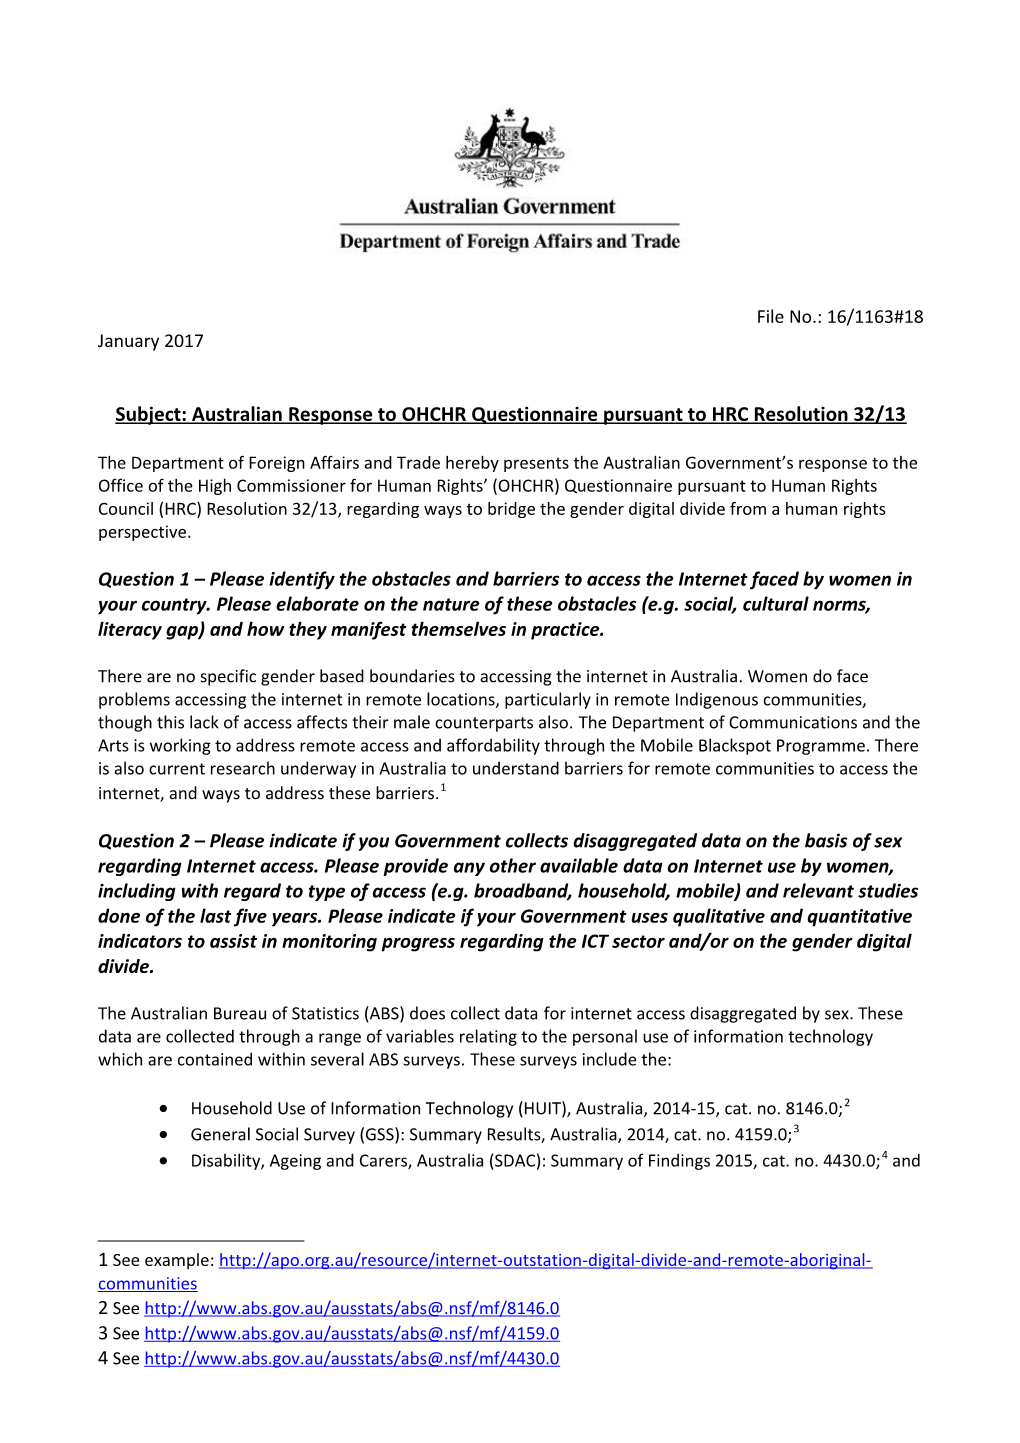 Subject: Australian Response to OHCHR Questionnaire Pursuant to HRC Resolution 32/13